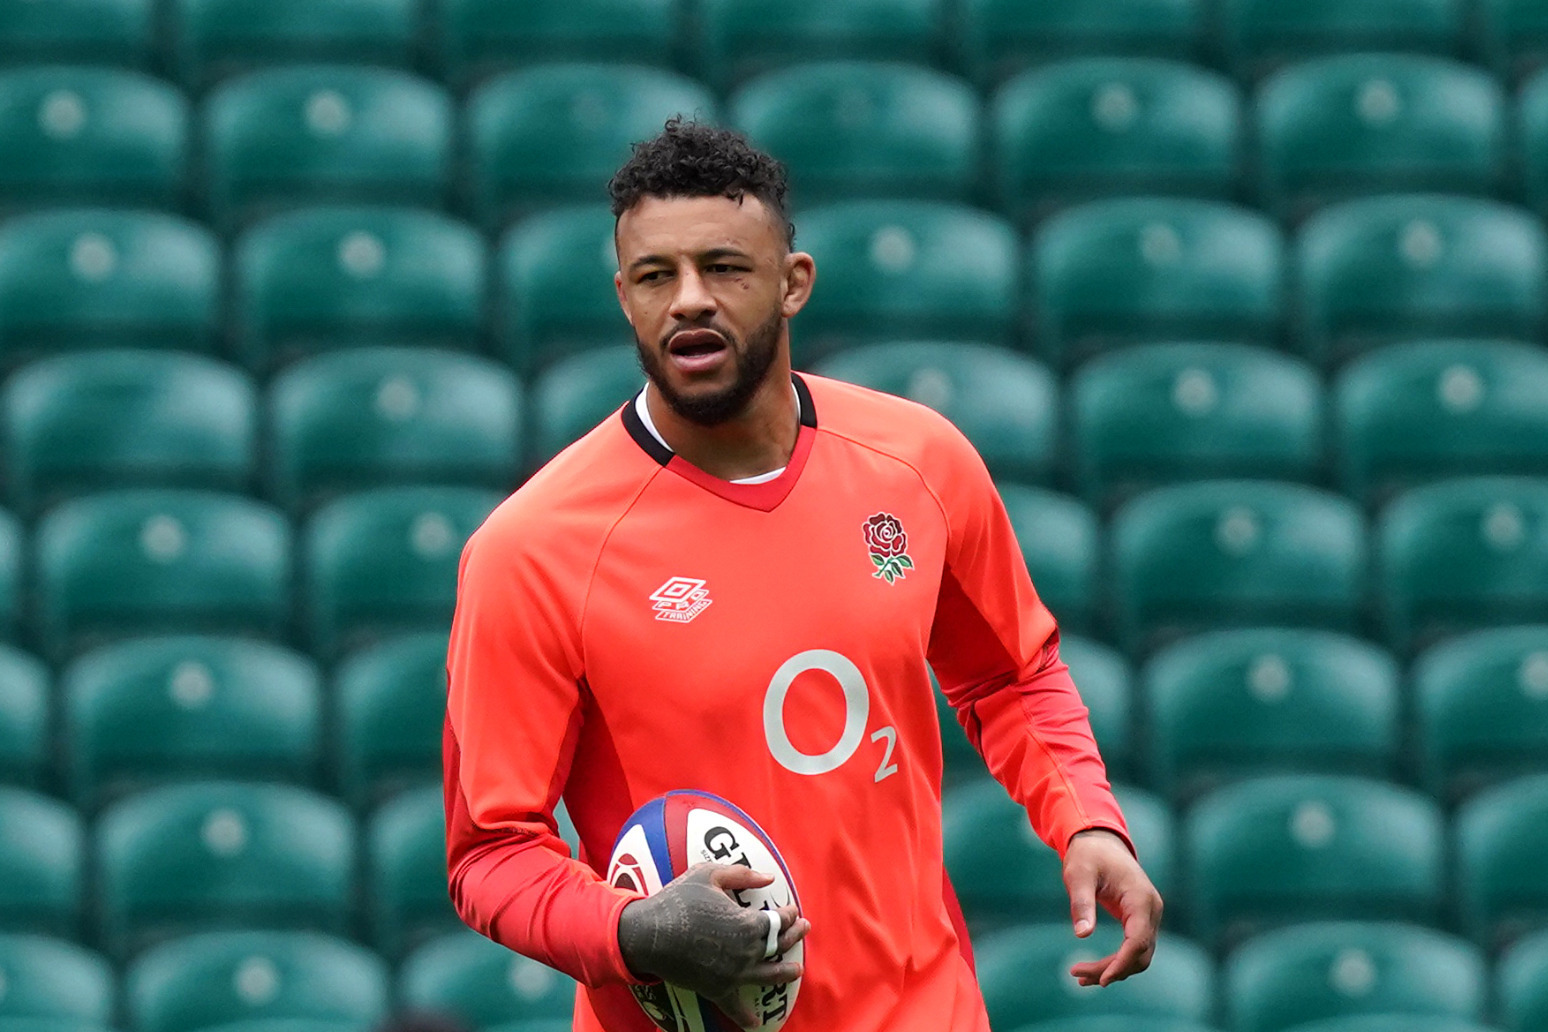 Dislocated thumb could rule Courtney Lawes out of Englands tour to Australia